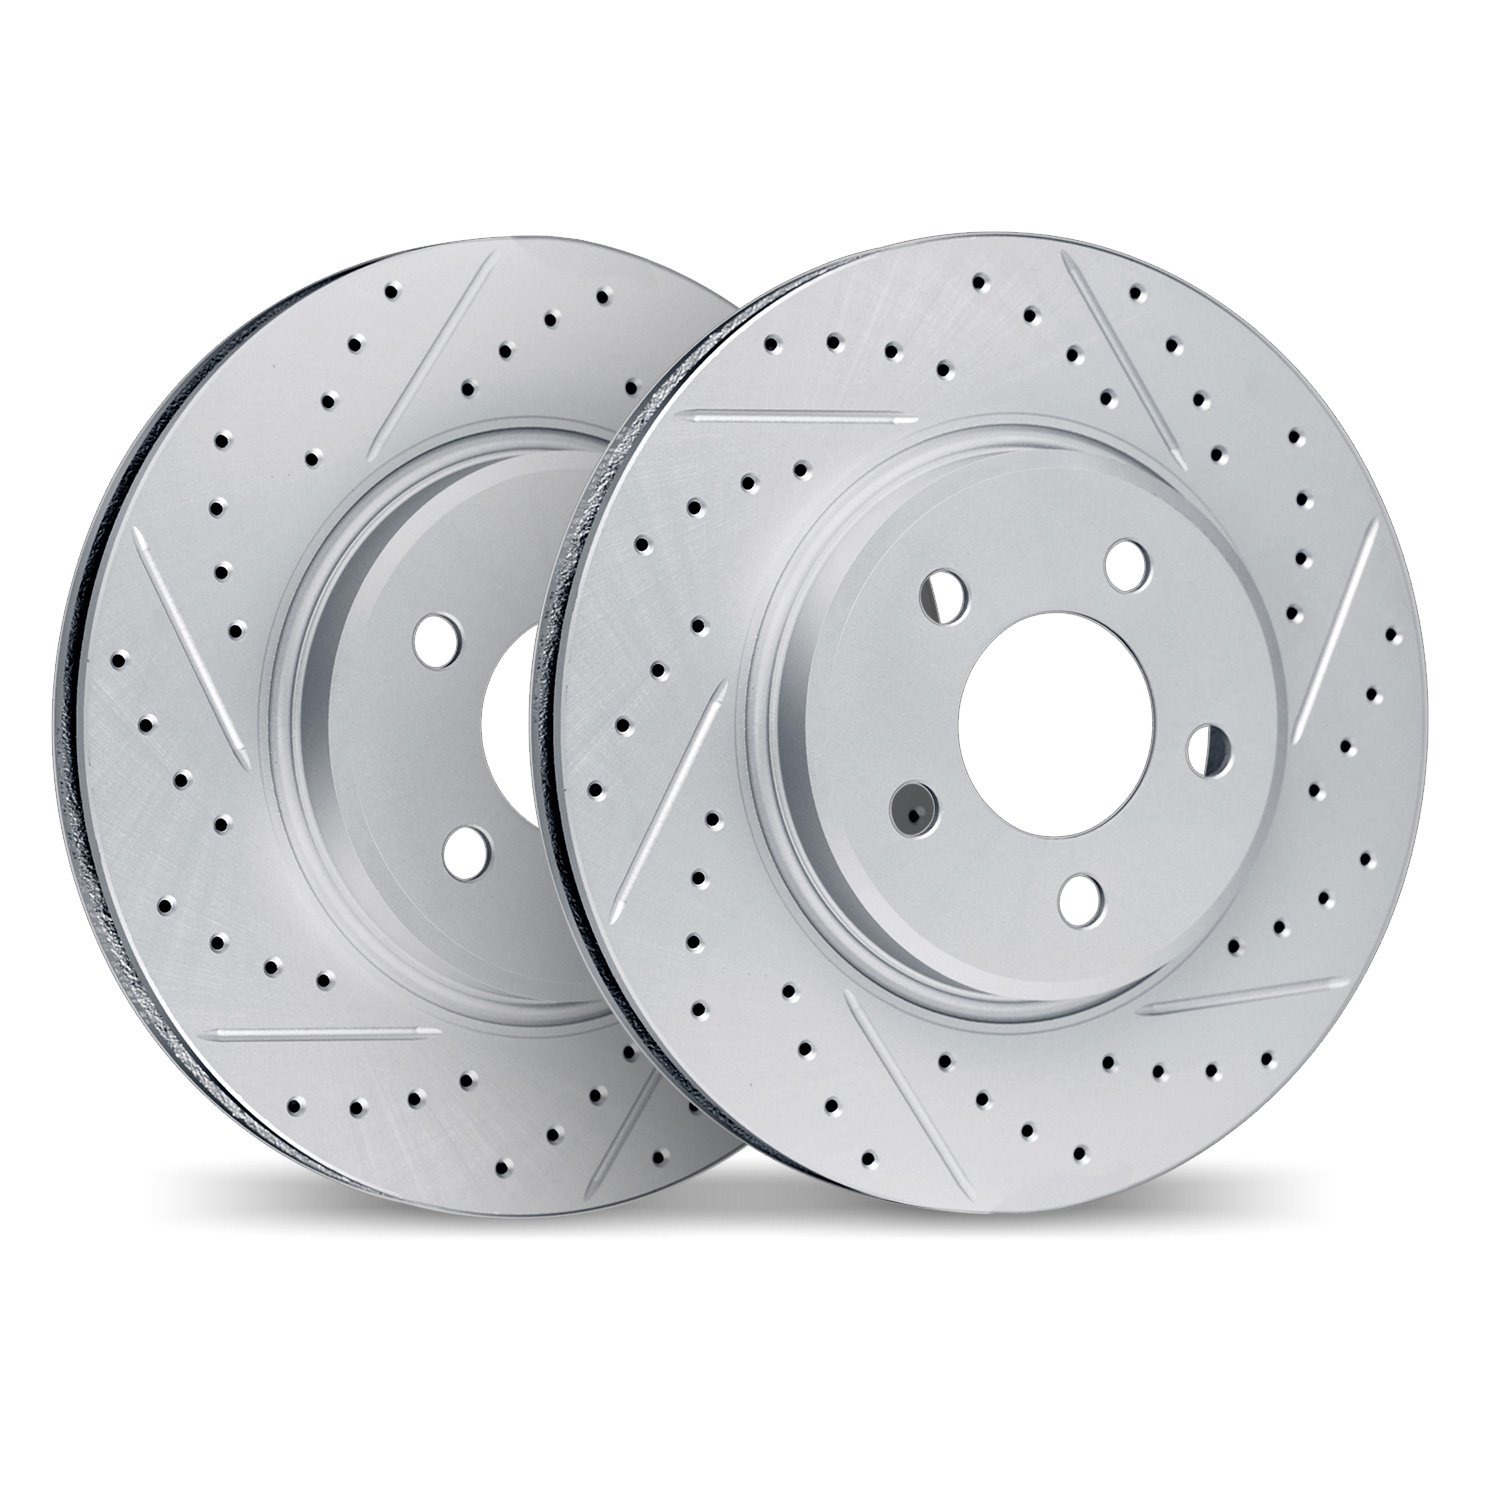 2002-47003 Geoperformance Drilled/Slotted Brake Rotors, 2005-2005 GM, Position: Front